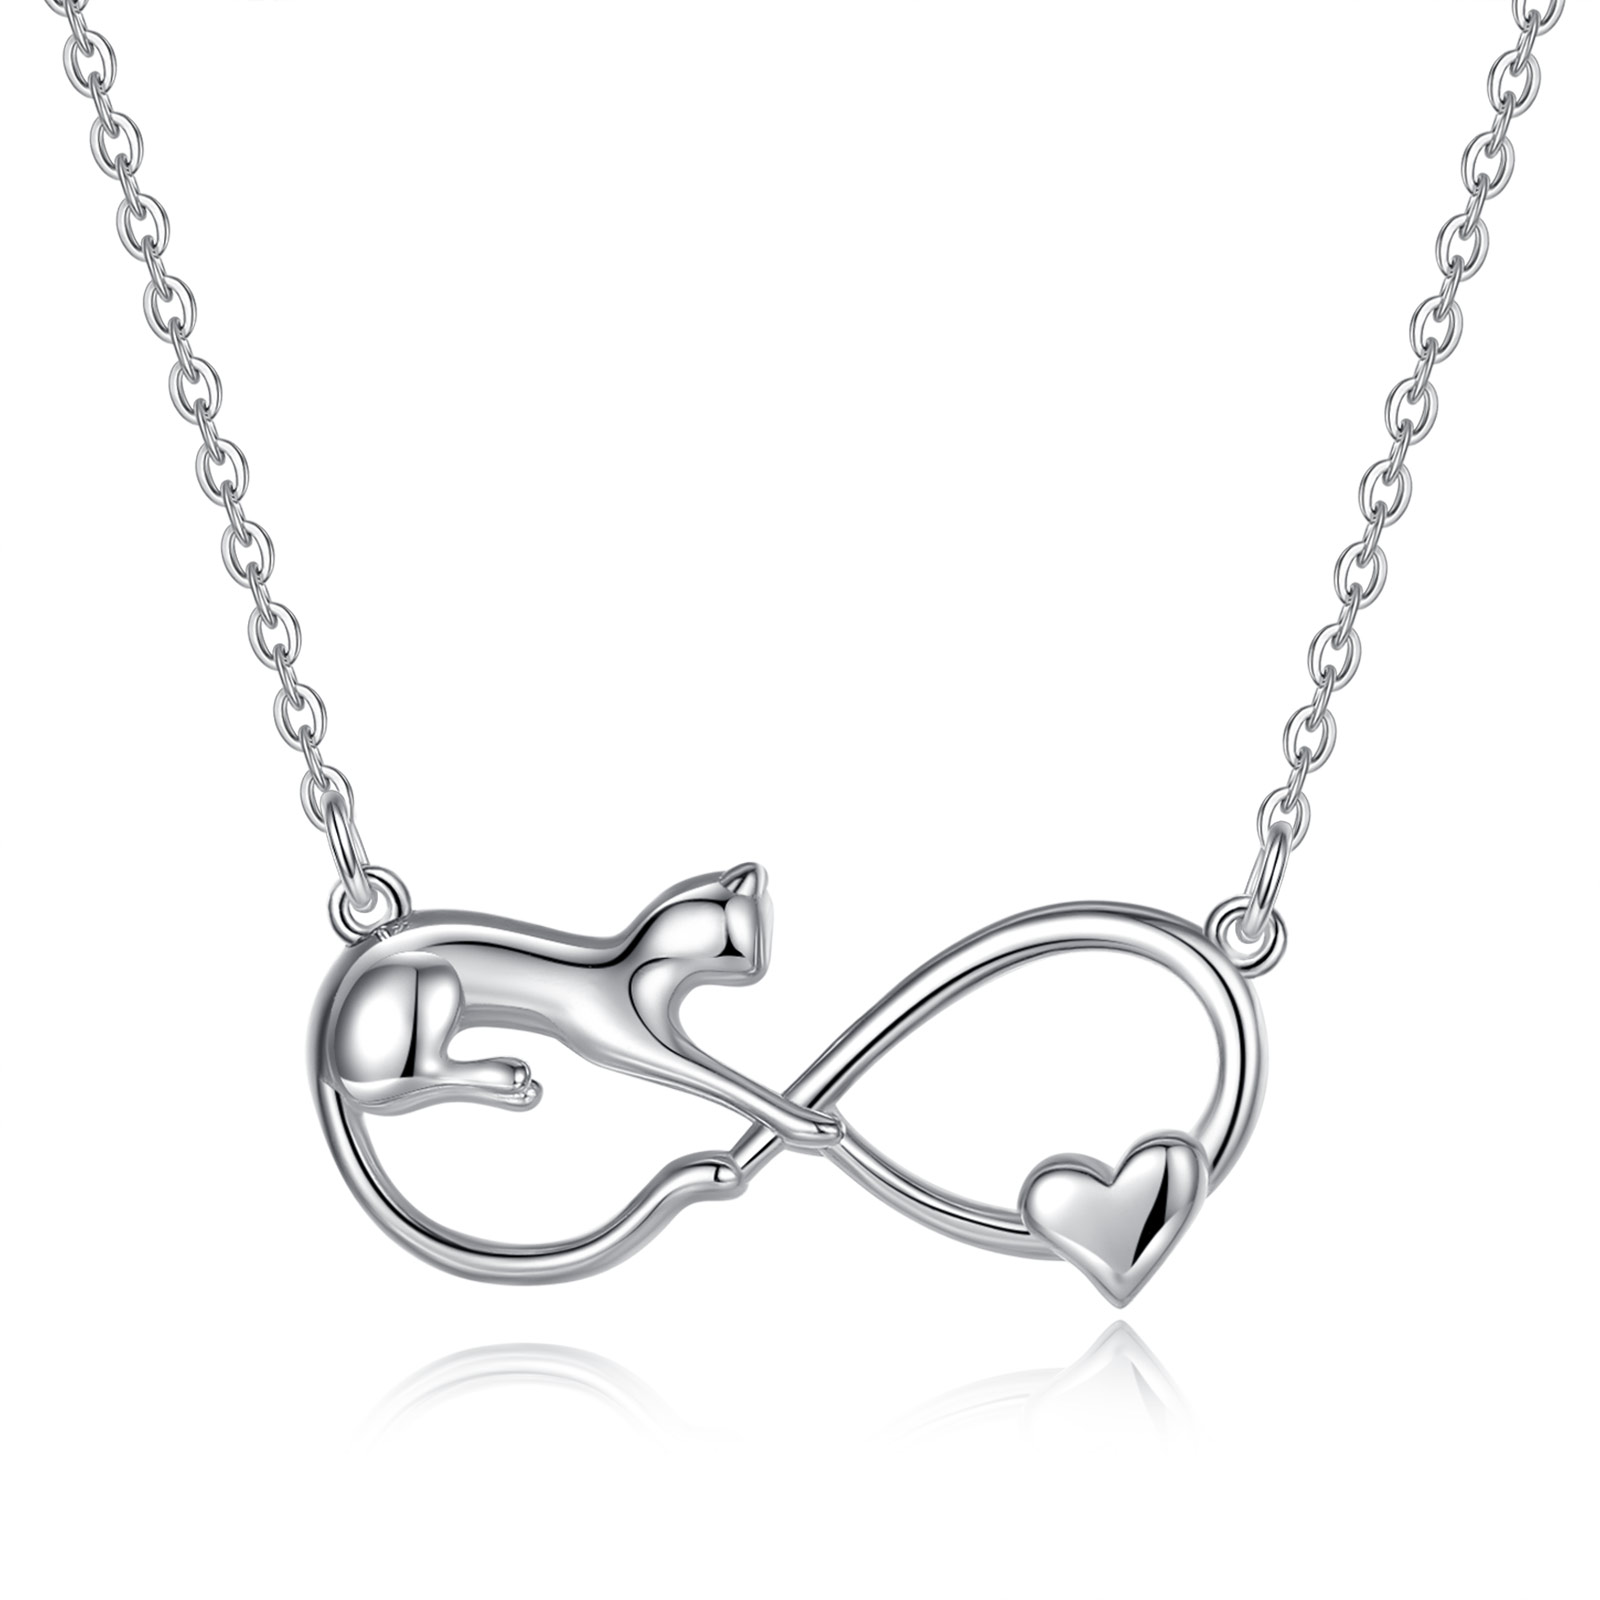 Merryshine Jewelry 925 Sterling Silver Infinity Symbol and Cat Necklace for Women